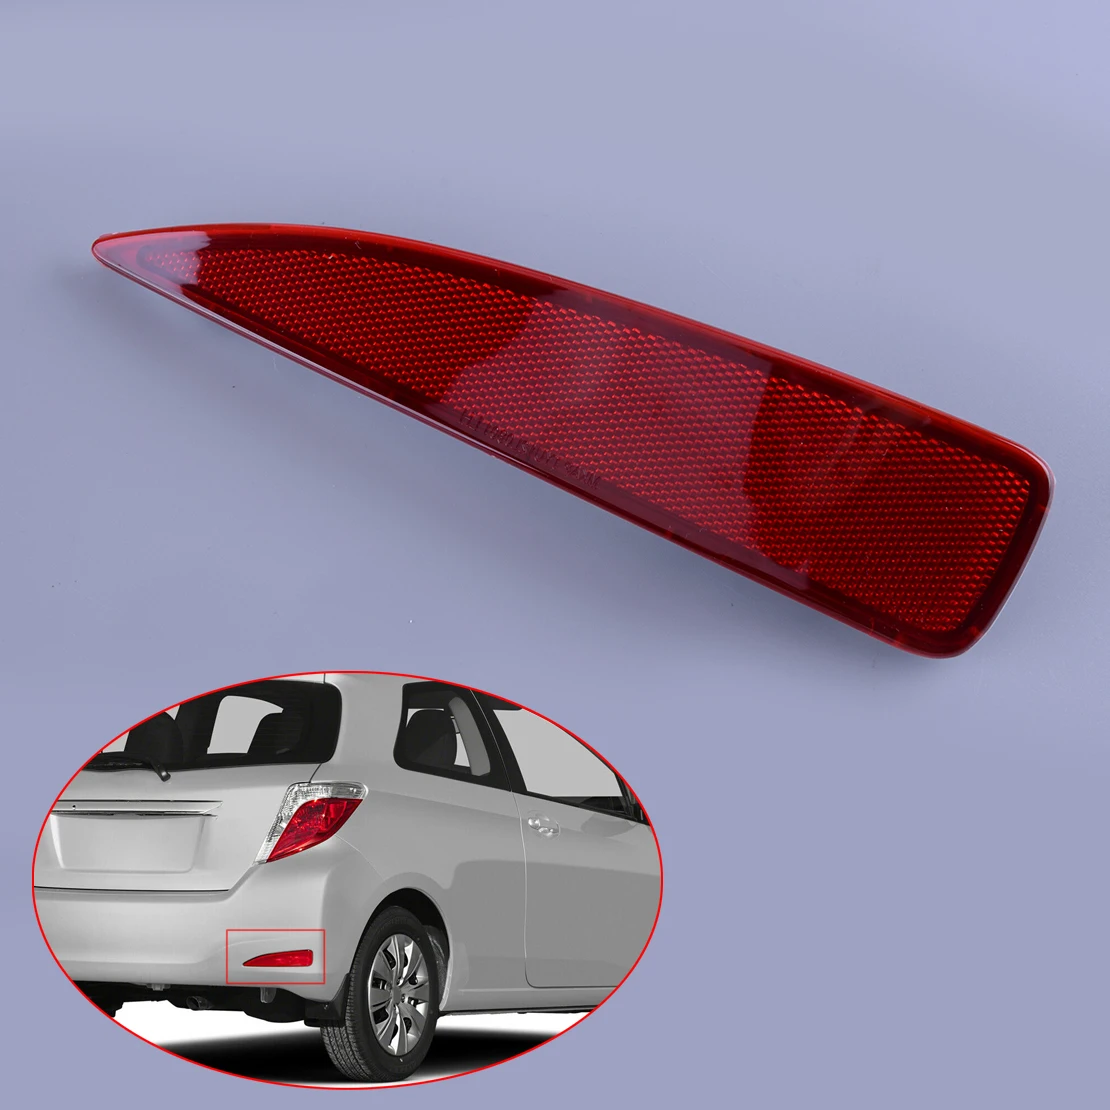 

52163-52100 TO1185103 Car Rear Bumper Right Reflector Light Lamp Housing Cover Fit For Toyota Yaris Base PREMIUM CE L LE 2012